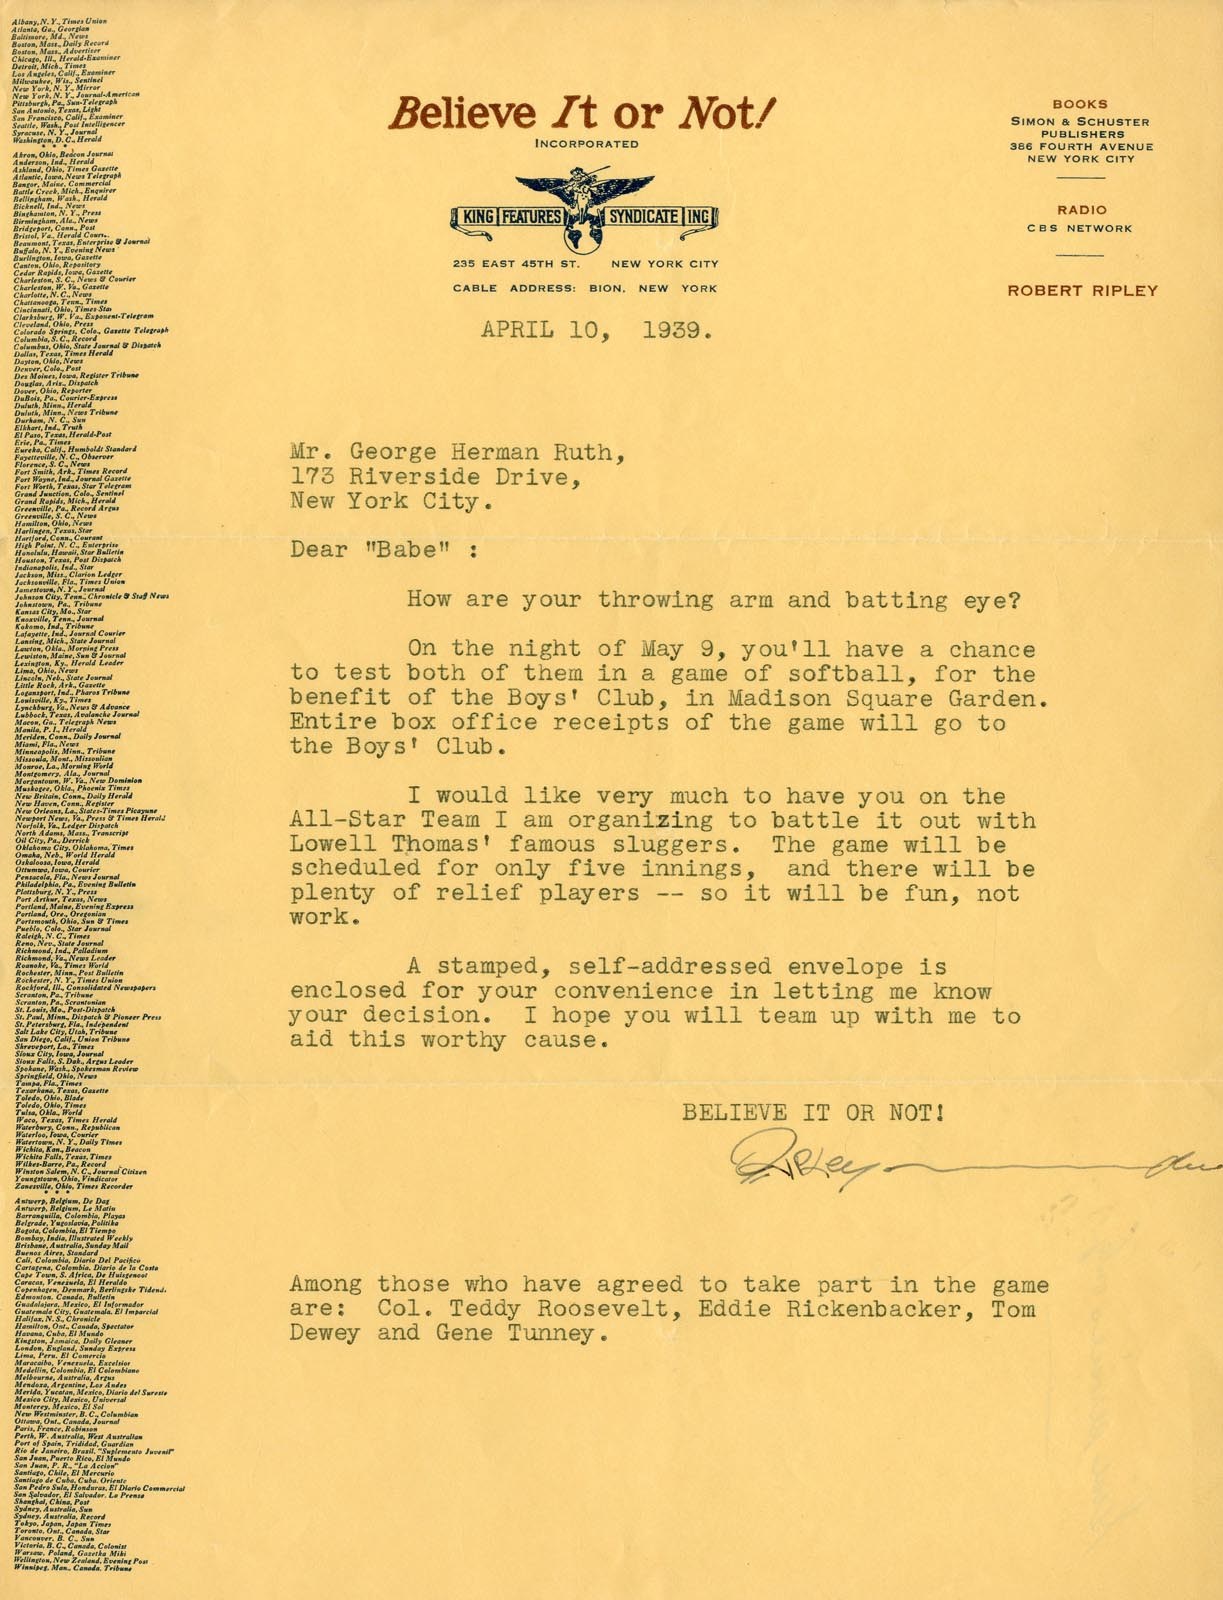 Collection Of Babe Ruth's Right Hand Man - 1930s-40s Letters to Babe Ruth w/His Premature Death (11)